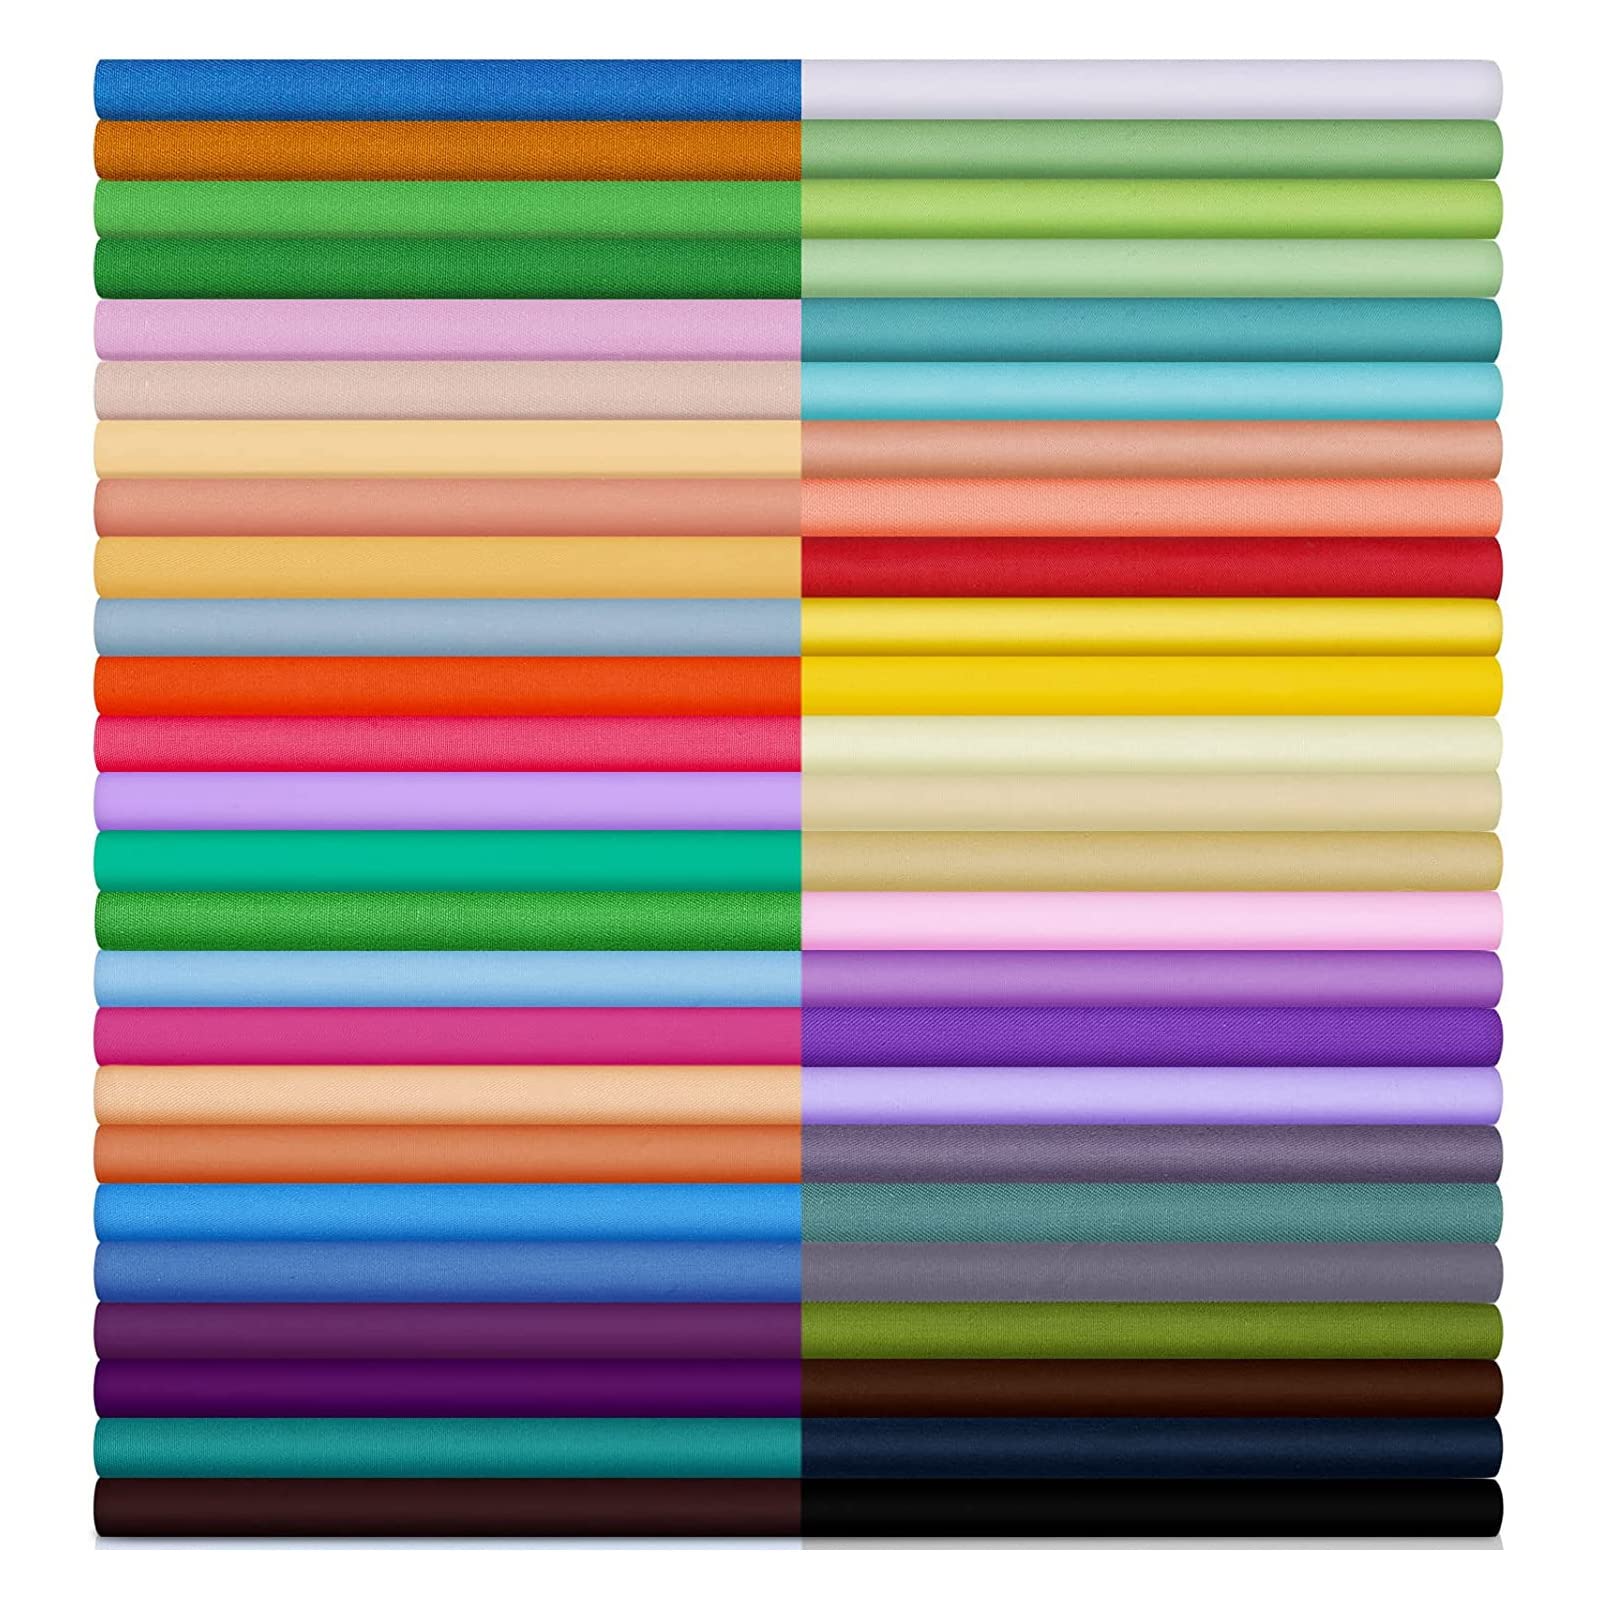 60 Pieces Solid Cotton Quilting Fabric Color Fabric Bundles Fabric